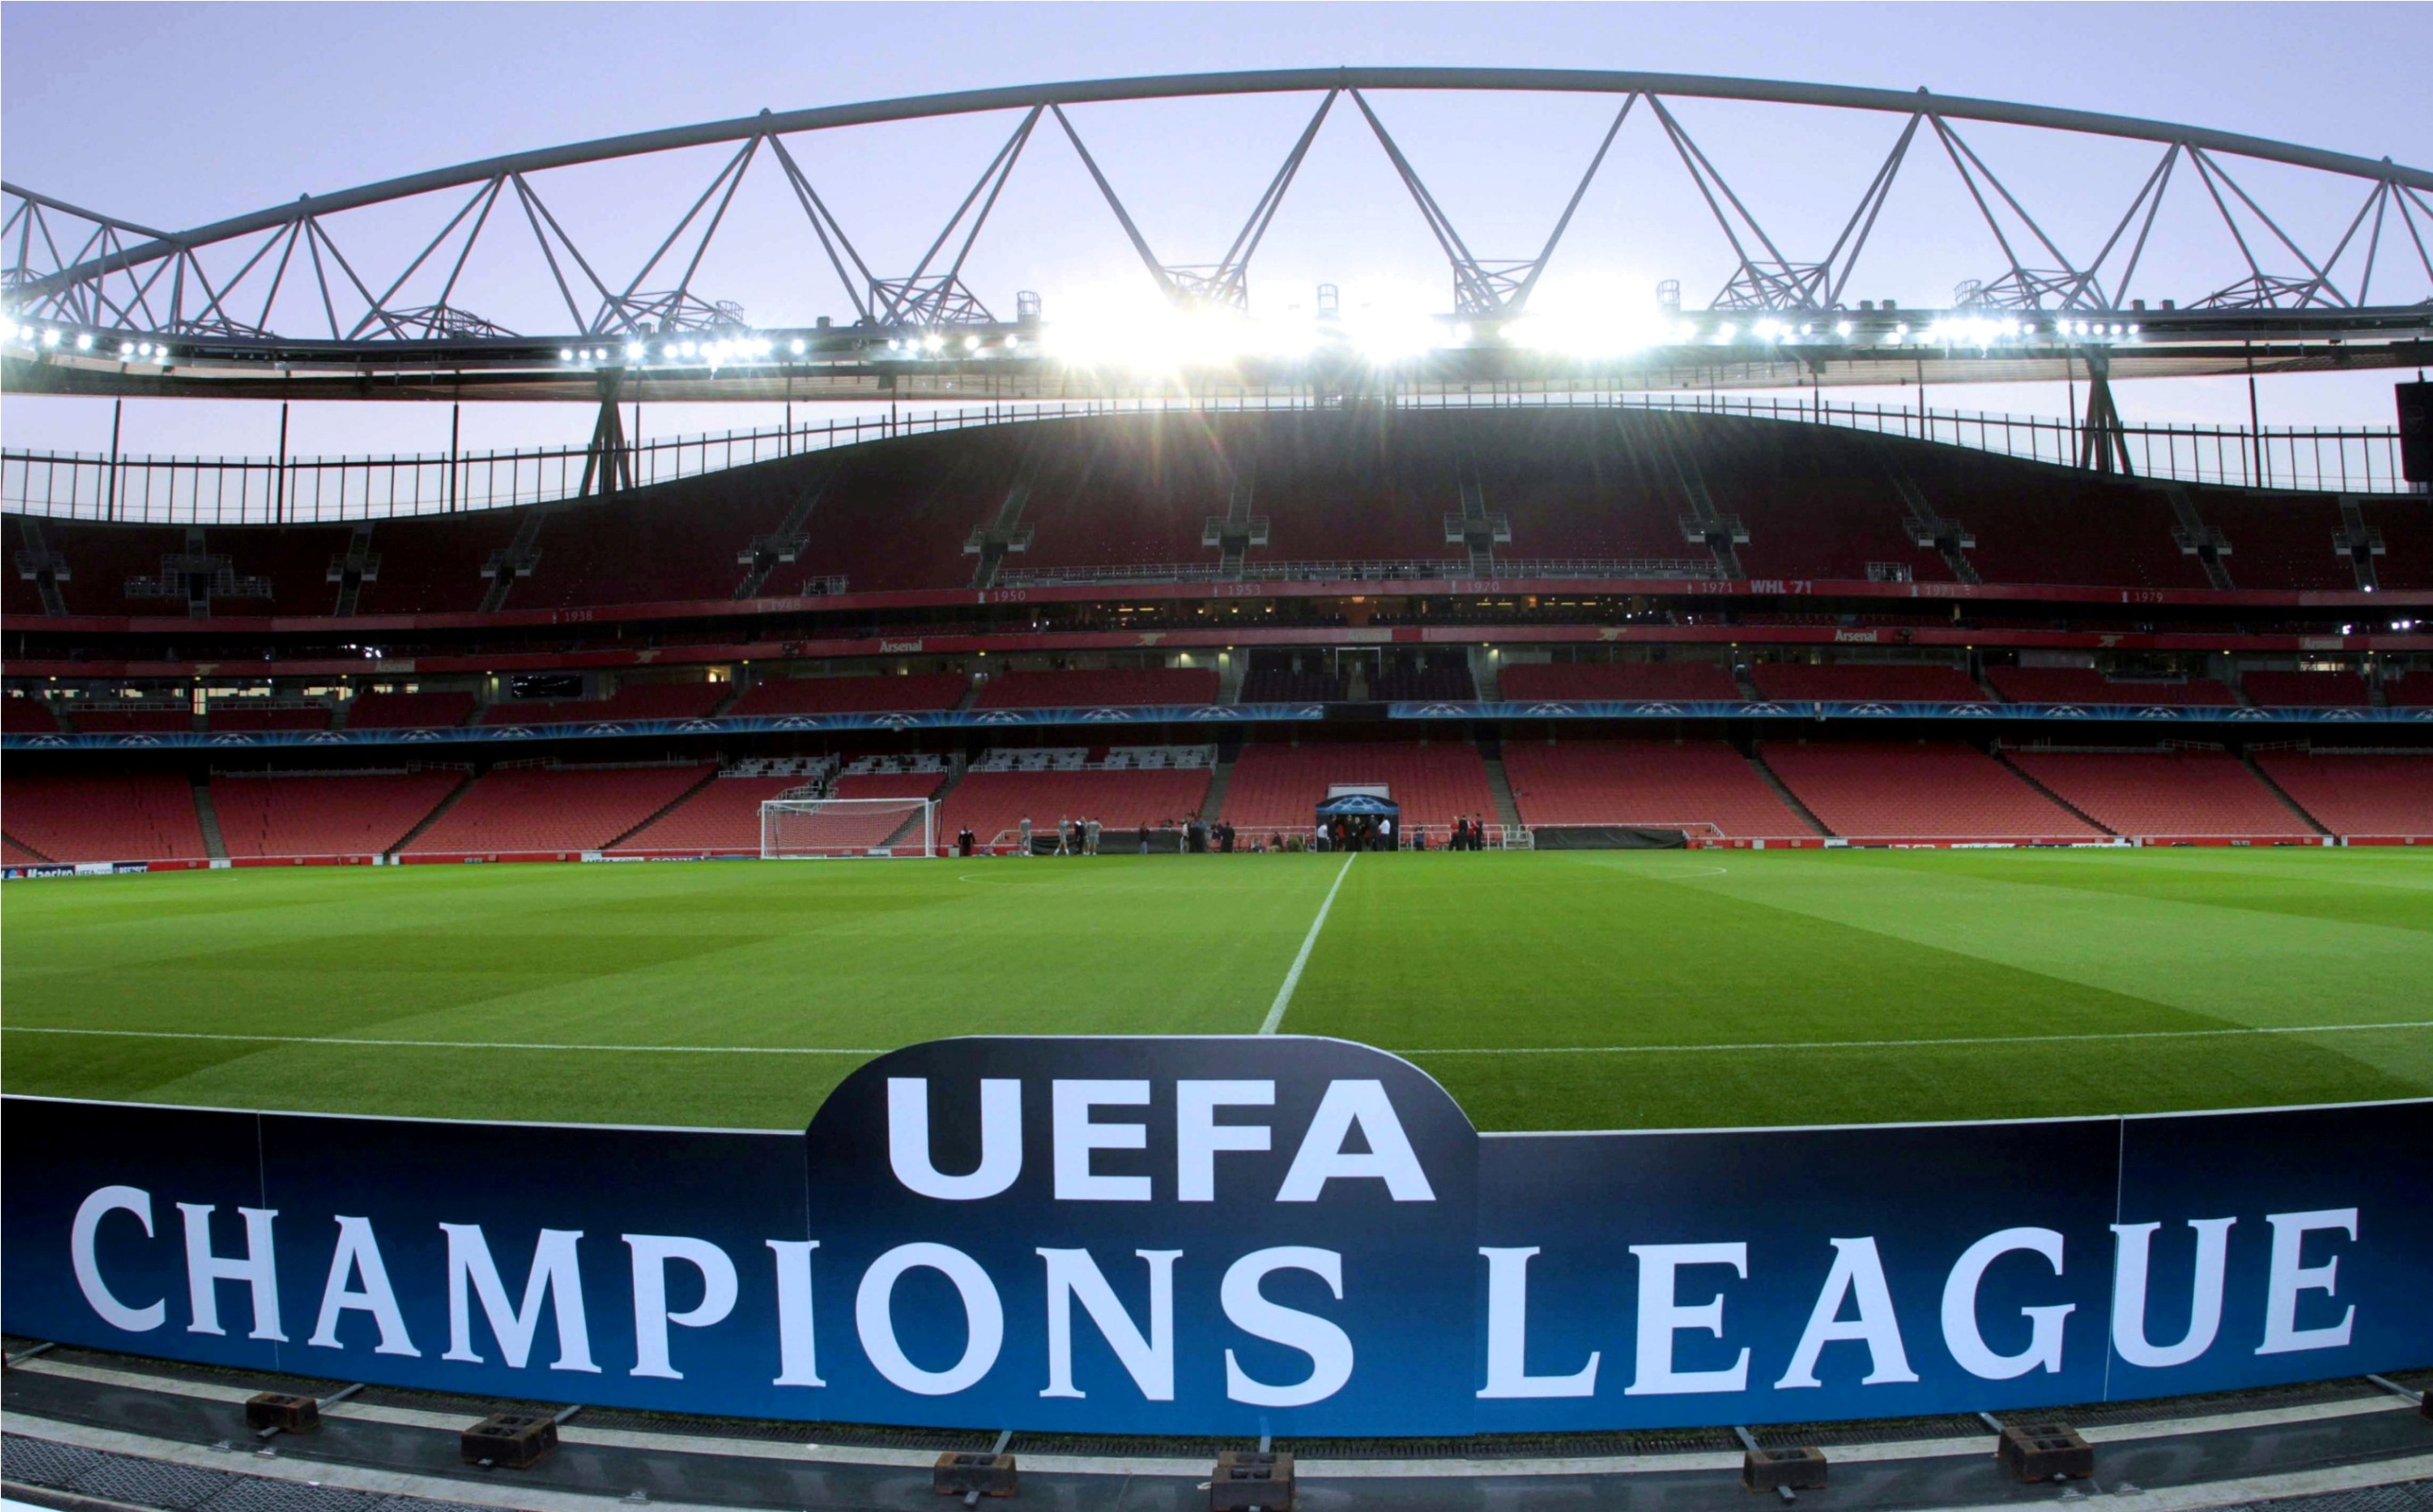 LIVE Web Radio coverage of the Arsenal vs Olympiacos match